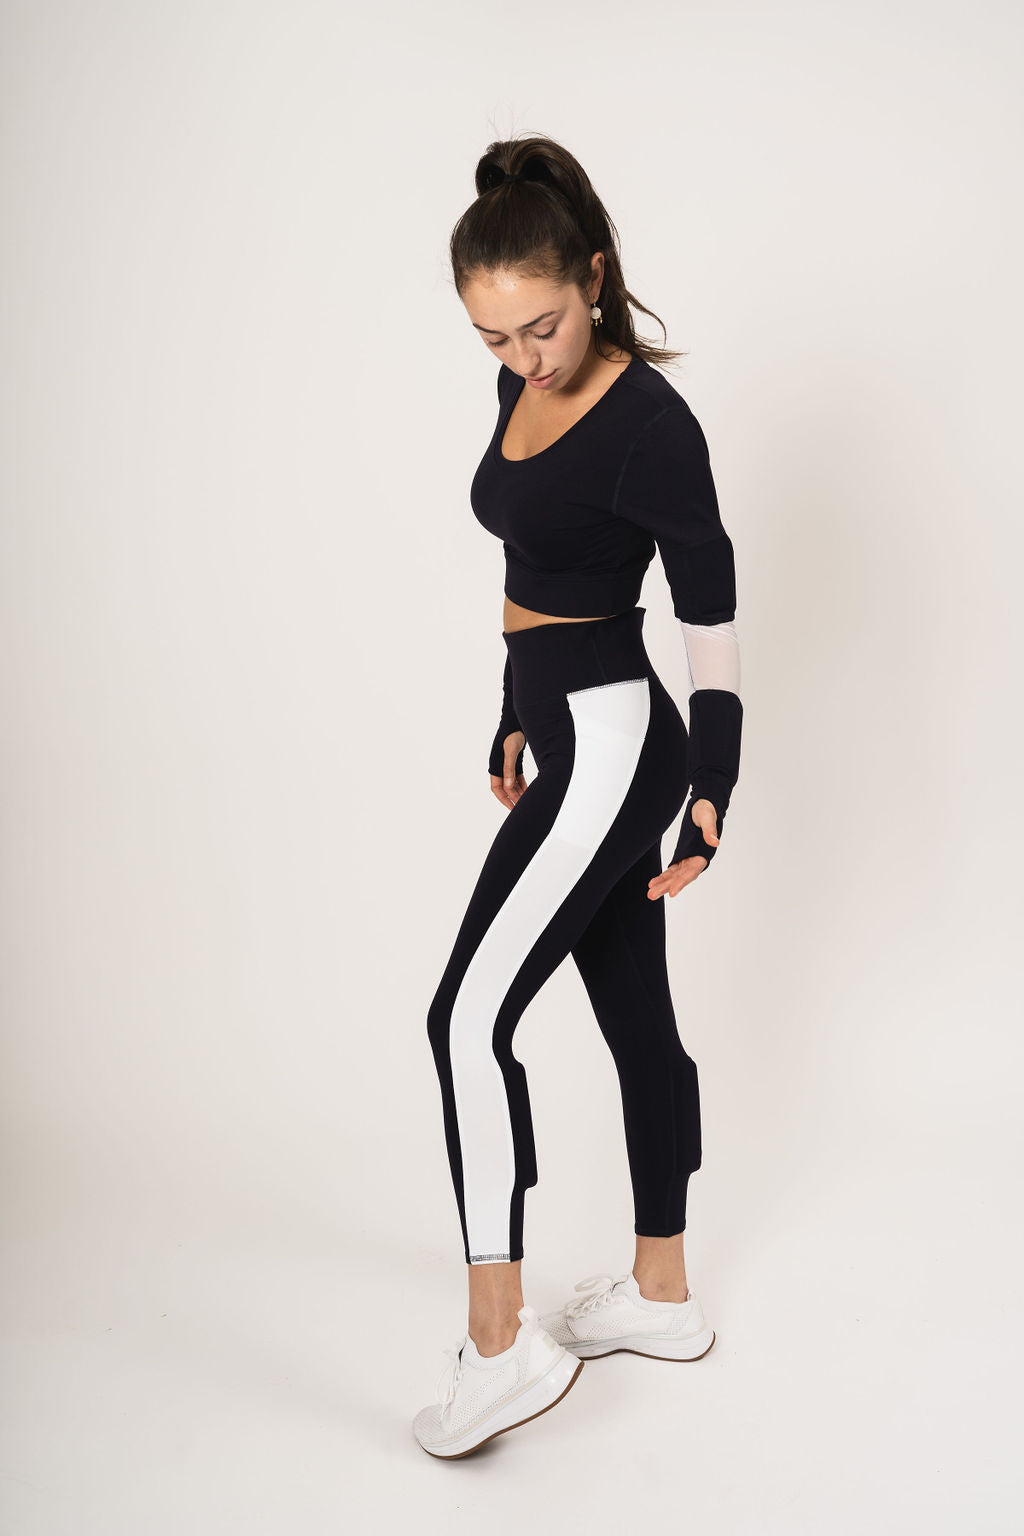 Model wearing the long sleeve scoop neck weighted shrug in navy with white accents and the weighted navy with white strip down the leg booty lift legging with weights on the calves.